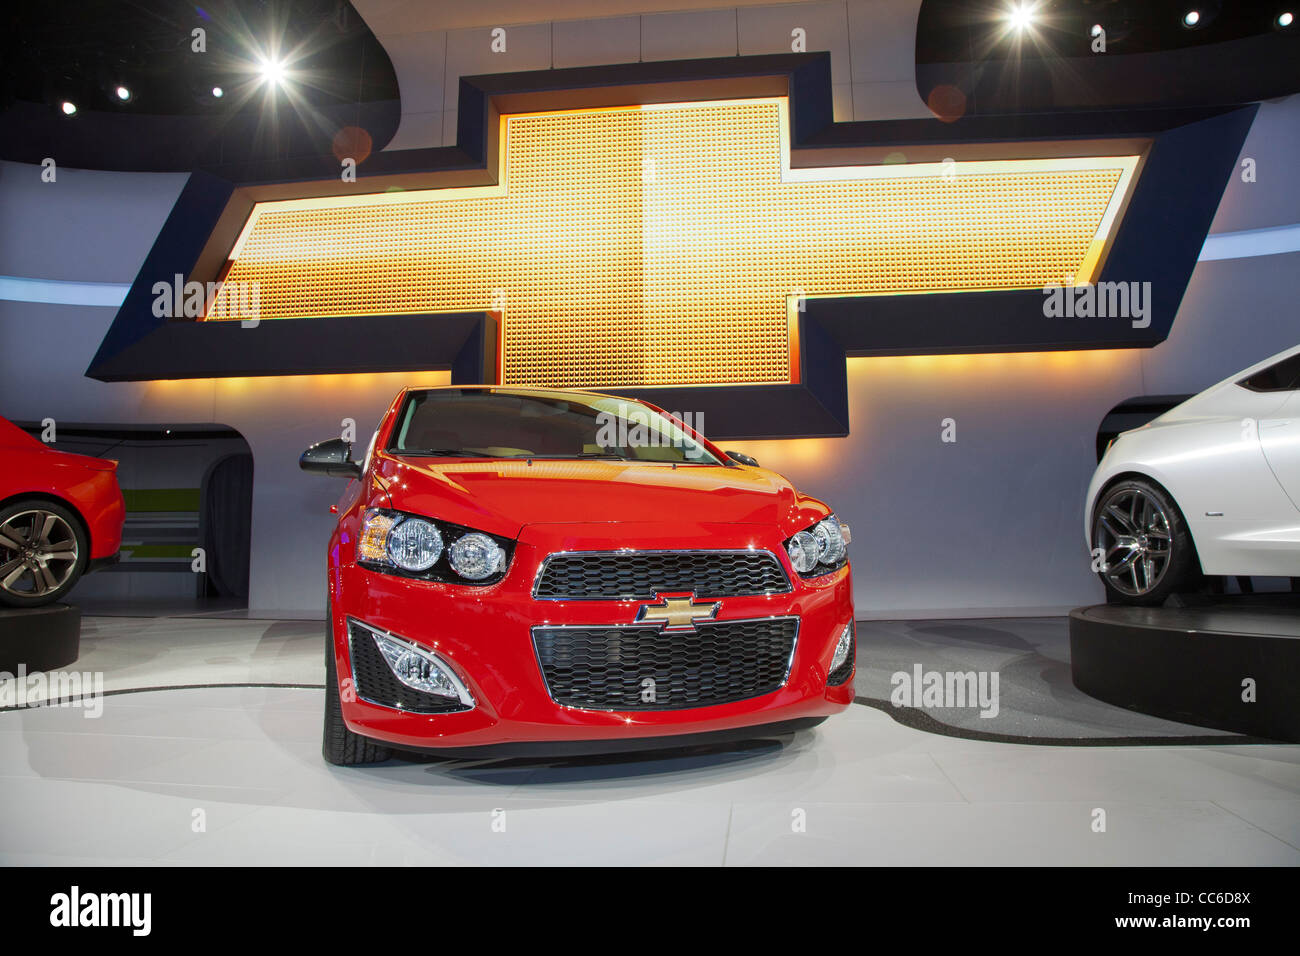 Chevrolet Aveo RS at Detroit motor show 2010